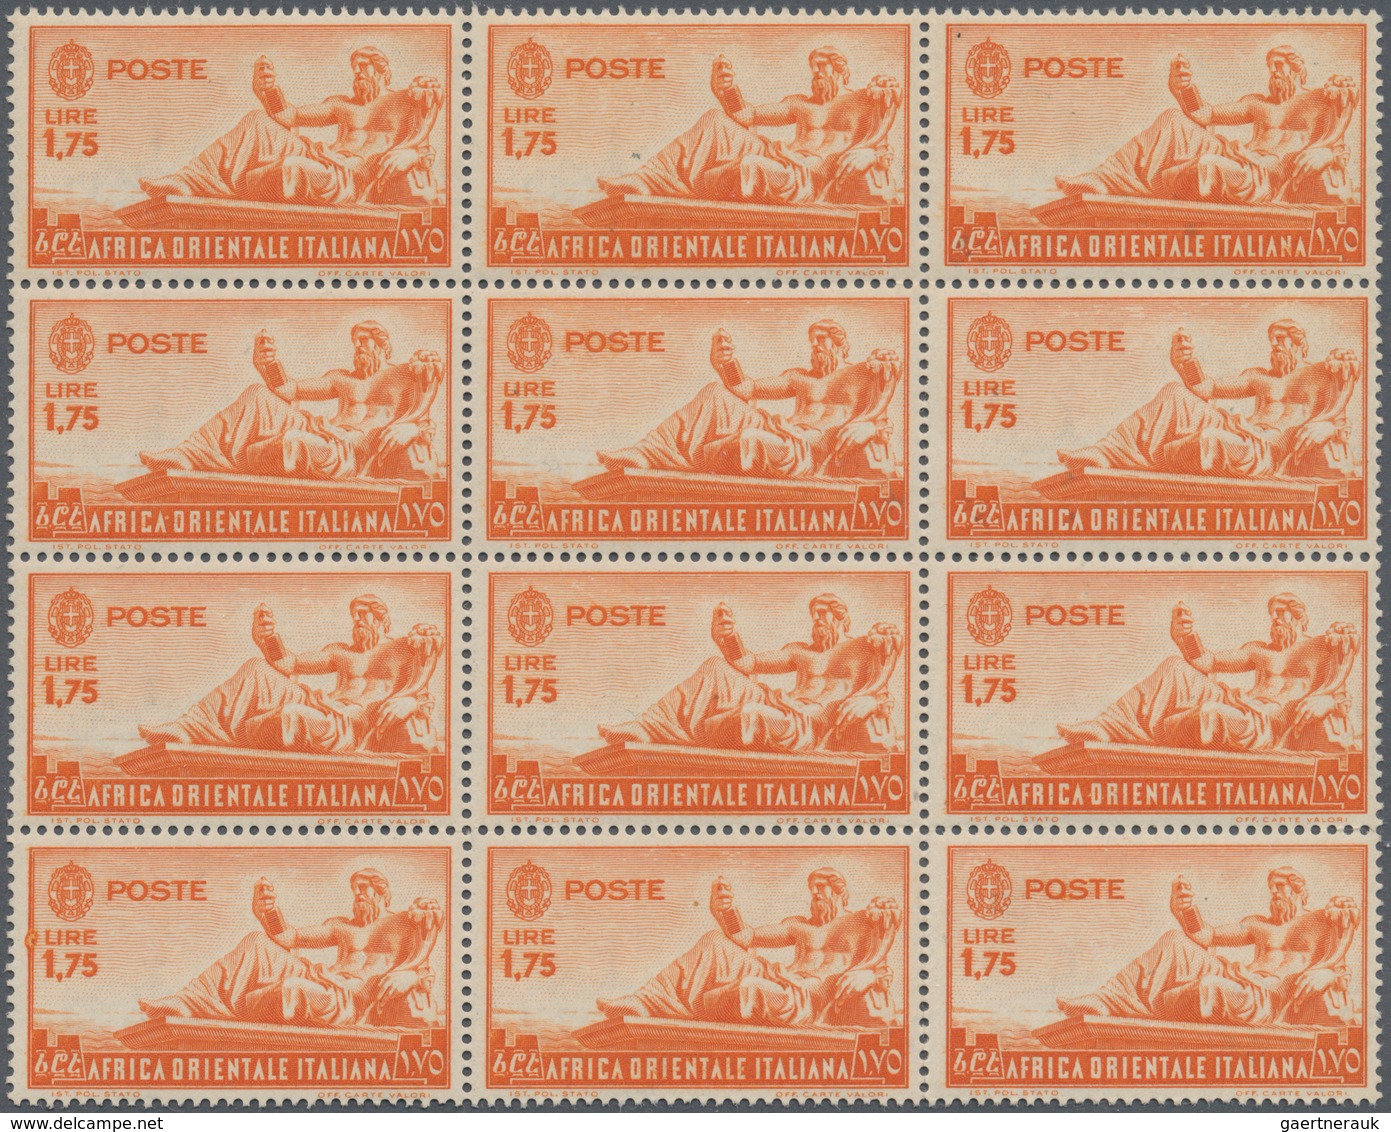 Italienisch-Ostafrika: 1938, Definitive Issue 1.75l. Orange 'The Nile' (hellenistic Sculpture) In A - Italiaans Oost-Afrika